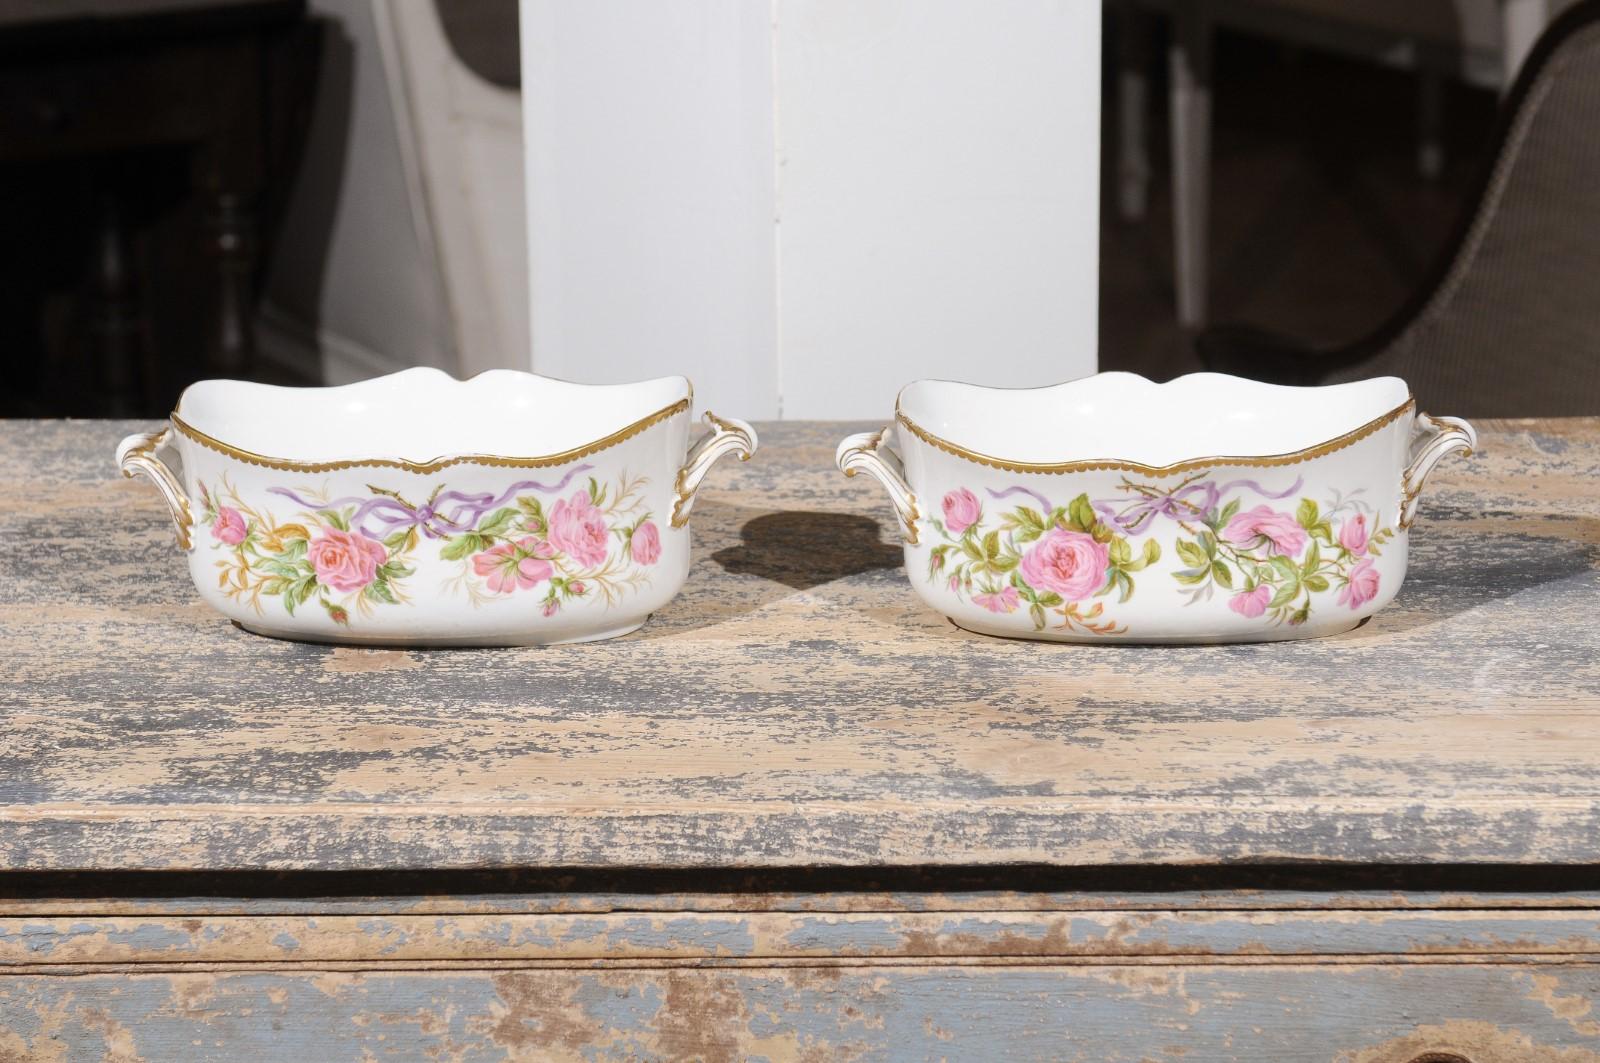 English Porcelain Bowls Depicting Bouquets of Pink Roses with Gilt Accents 1